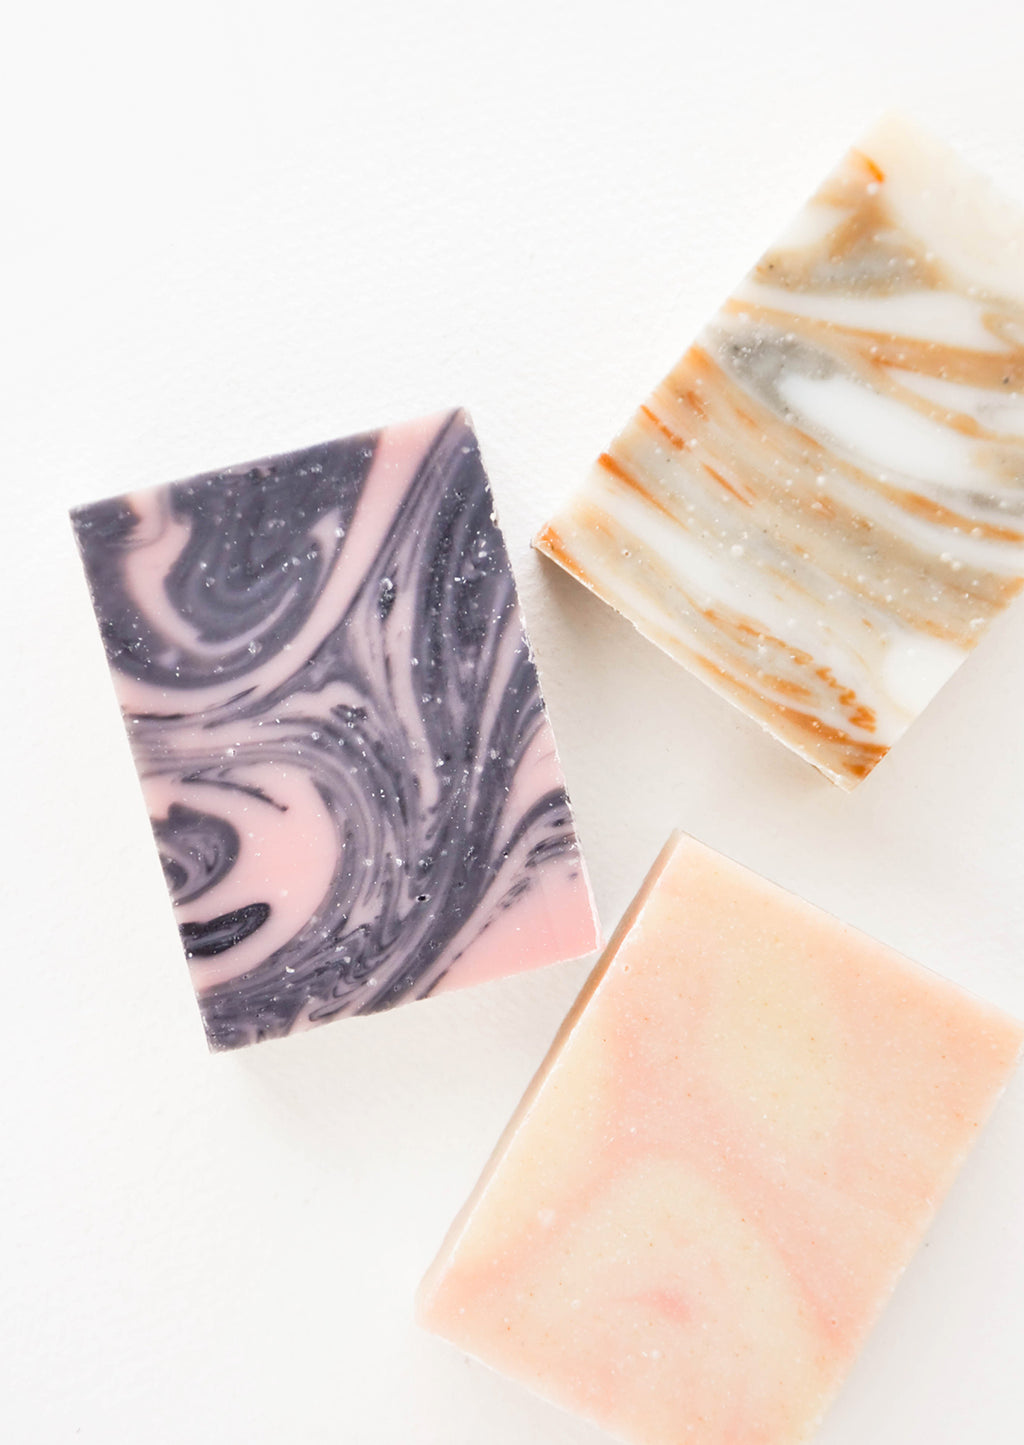 2: Three marbled bar soaps in black and pink, pink and beige, and white and orange.